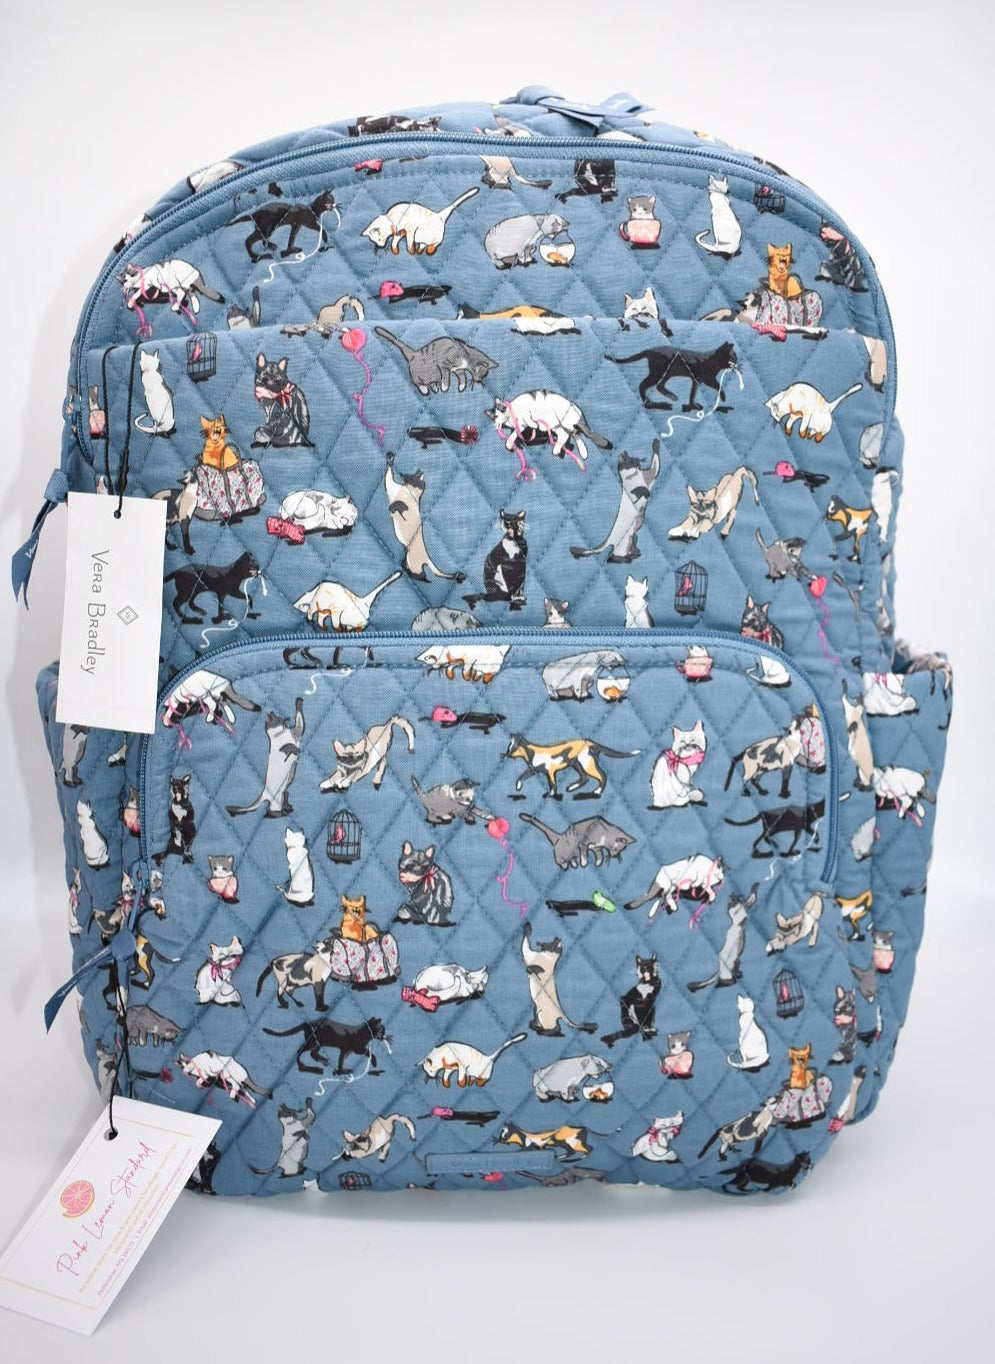 Vera Bradley Large Essential Backpack in "Cat's Meow" Pattern